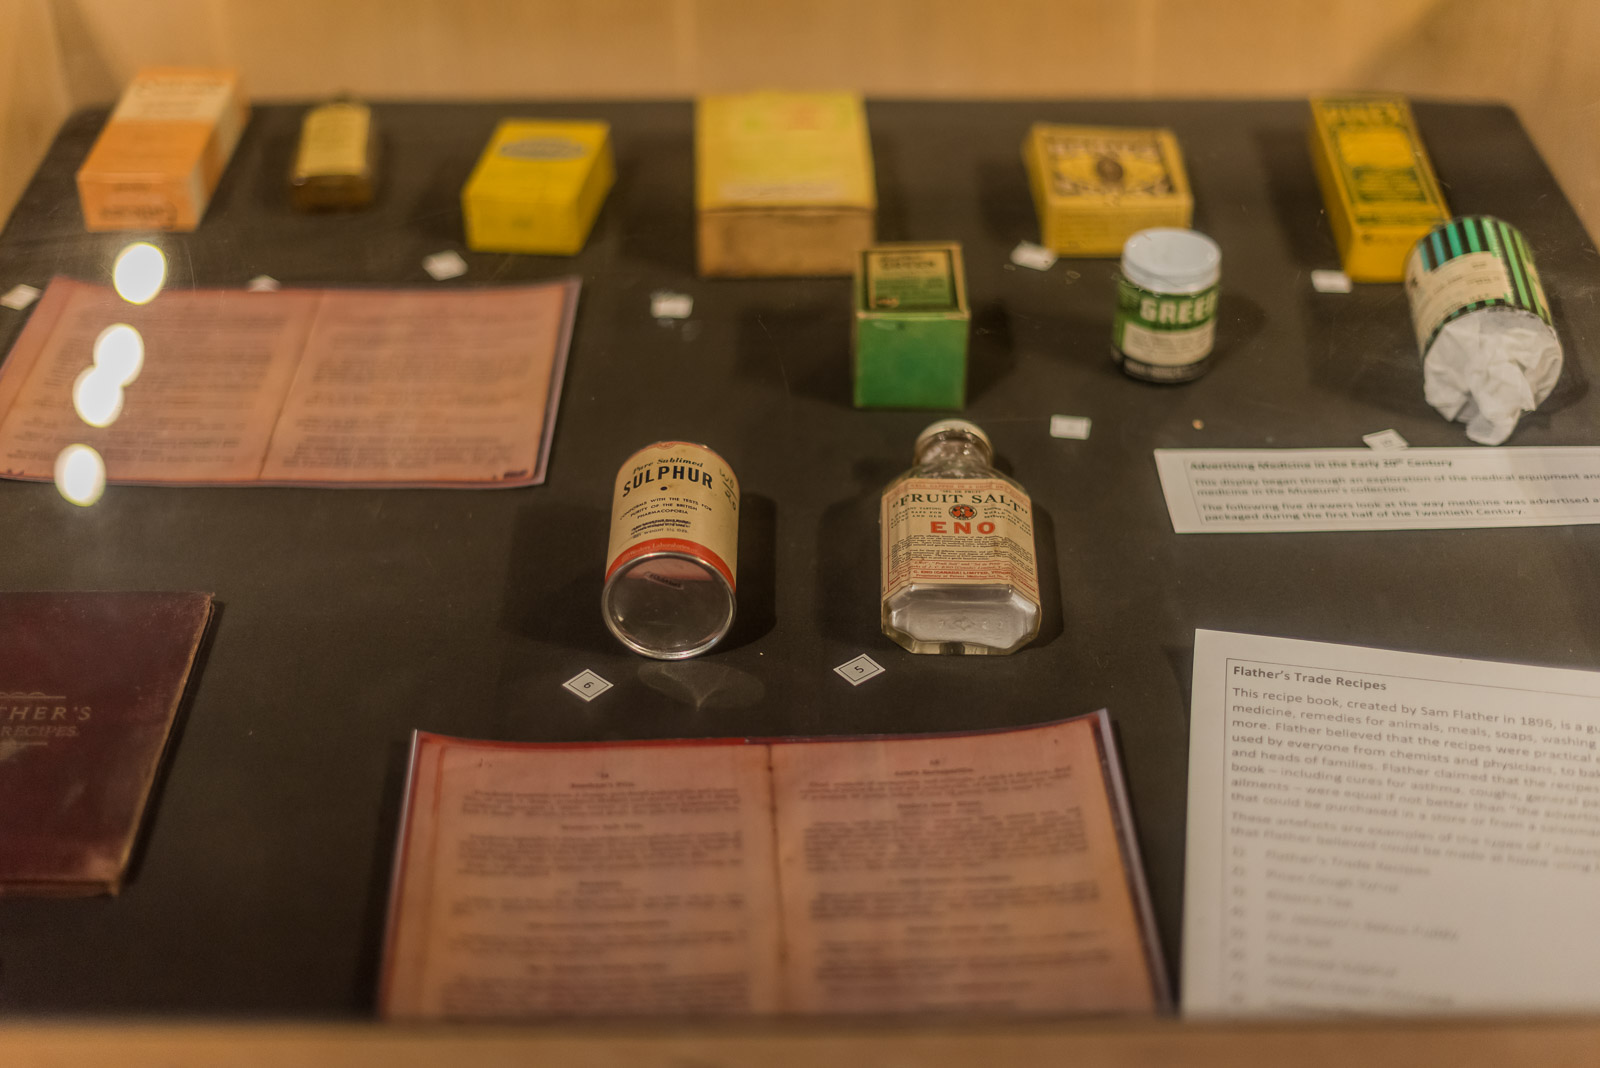 Display of recipes and medicines commonly used through the early 20th century